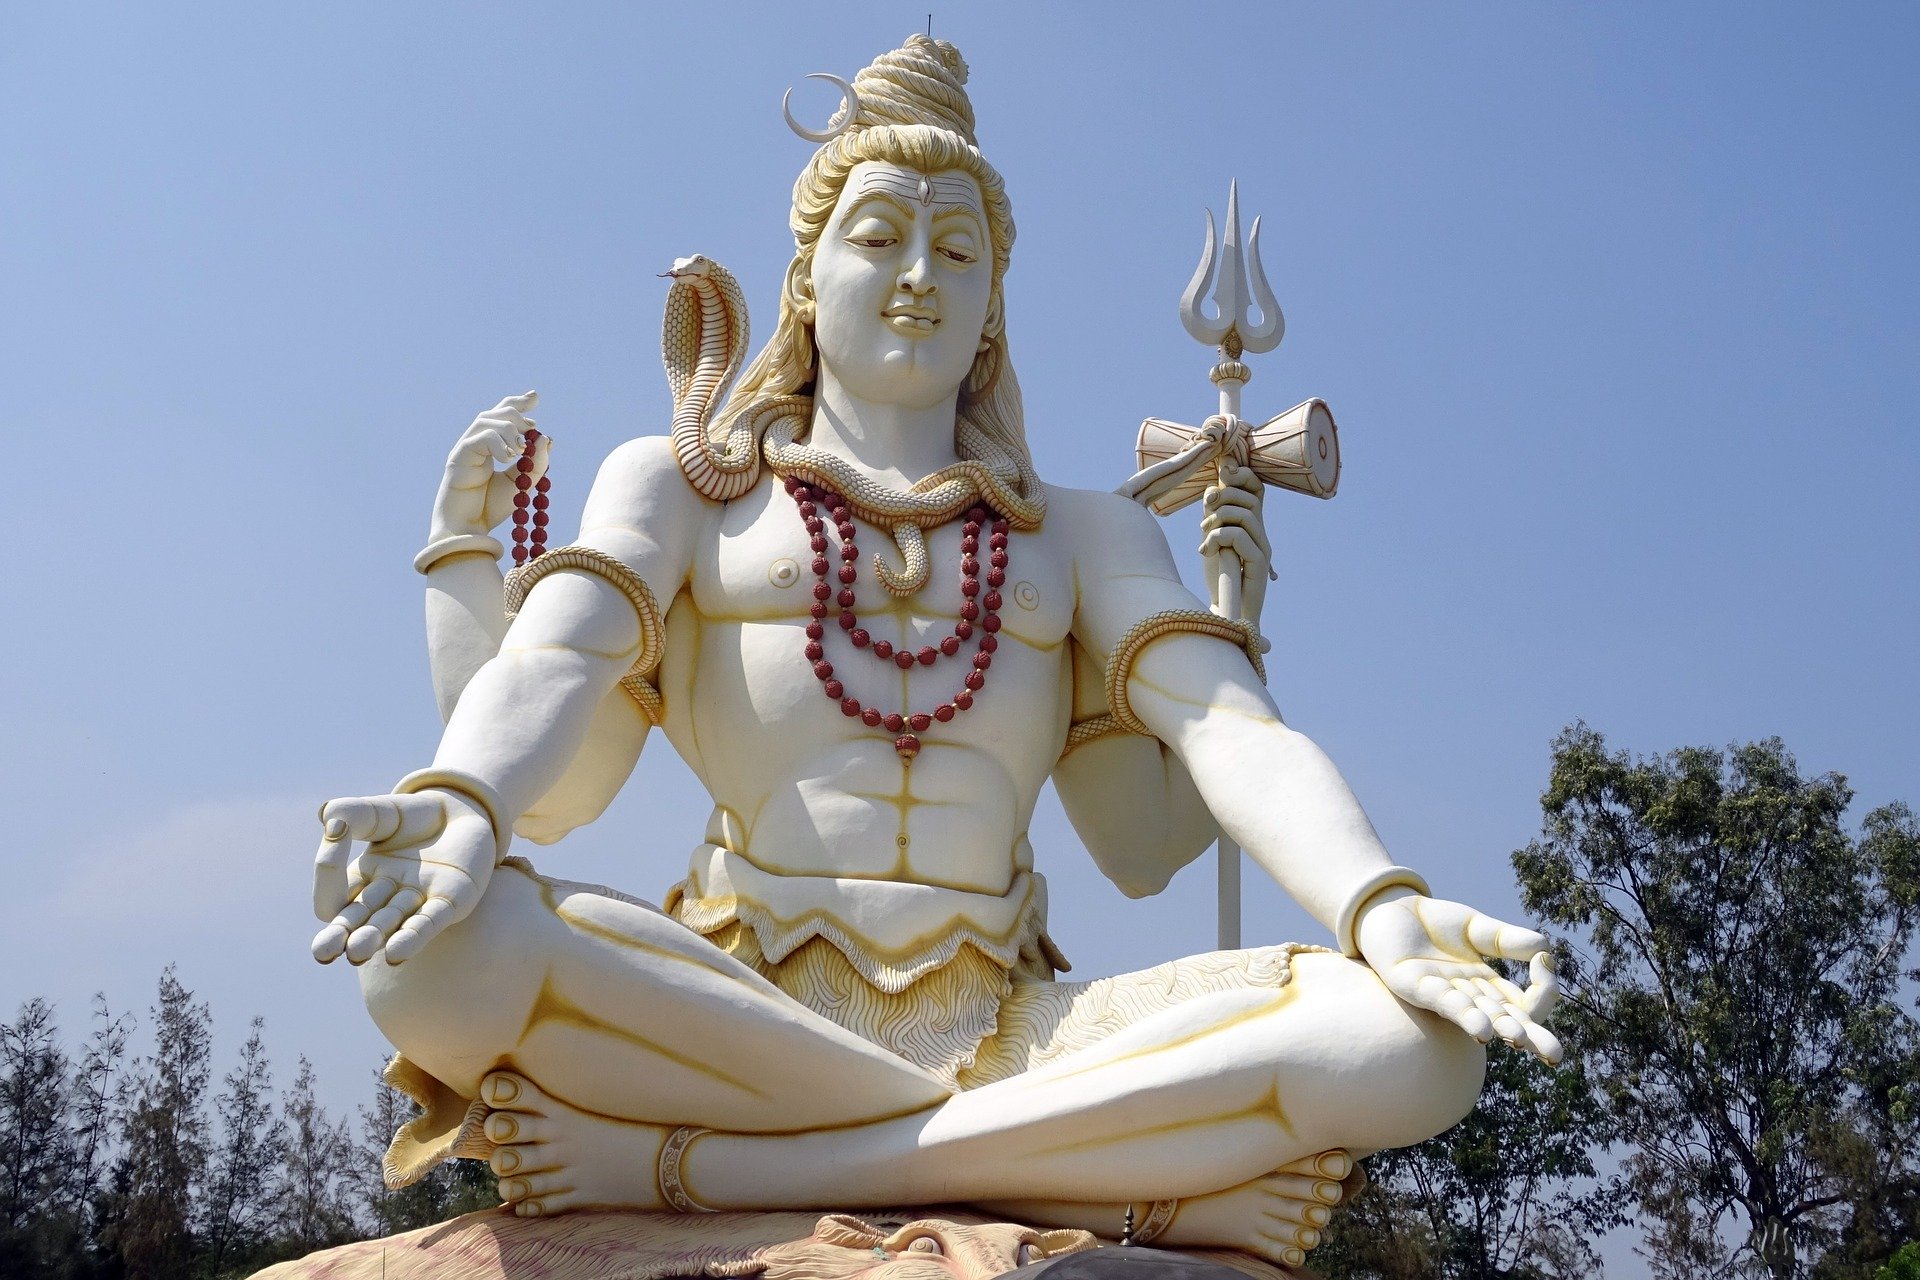 Why lord shiva is known as Mahadev!